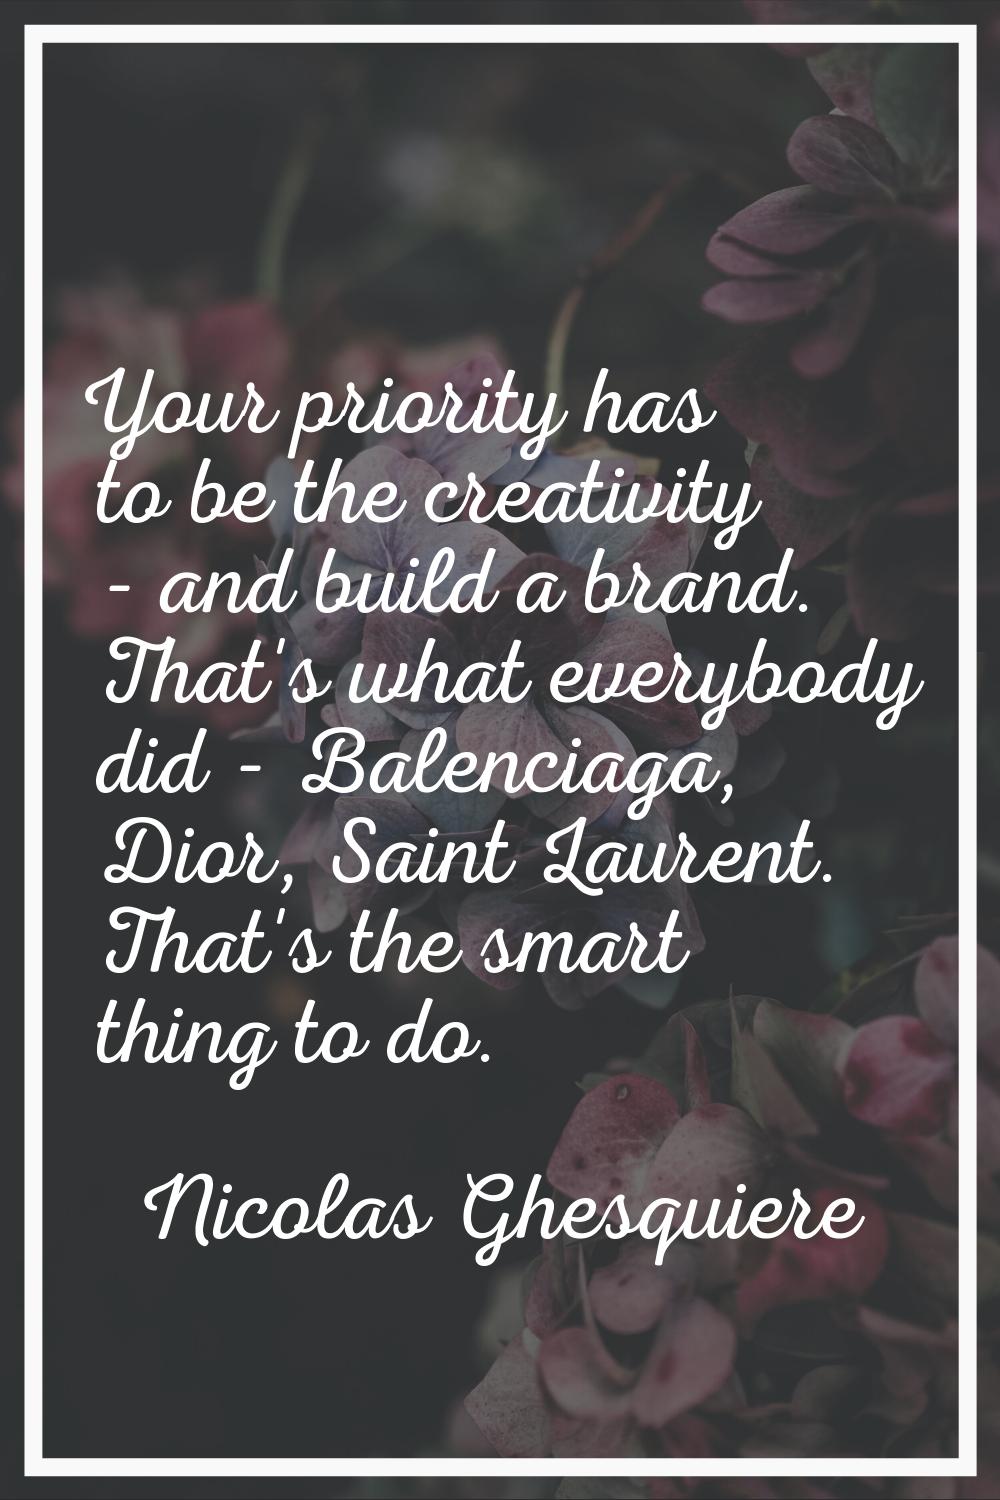 Your priority has to be the creativity - and build a brand. That's what everybody did - Balenciaga,